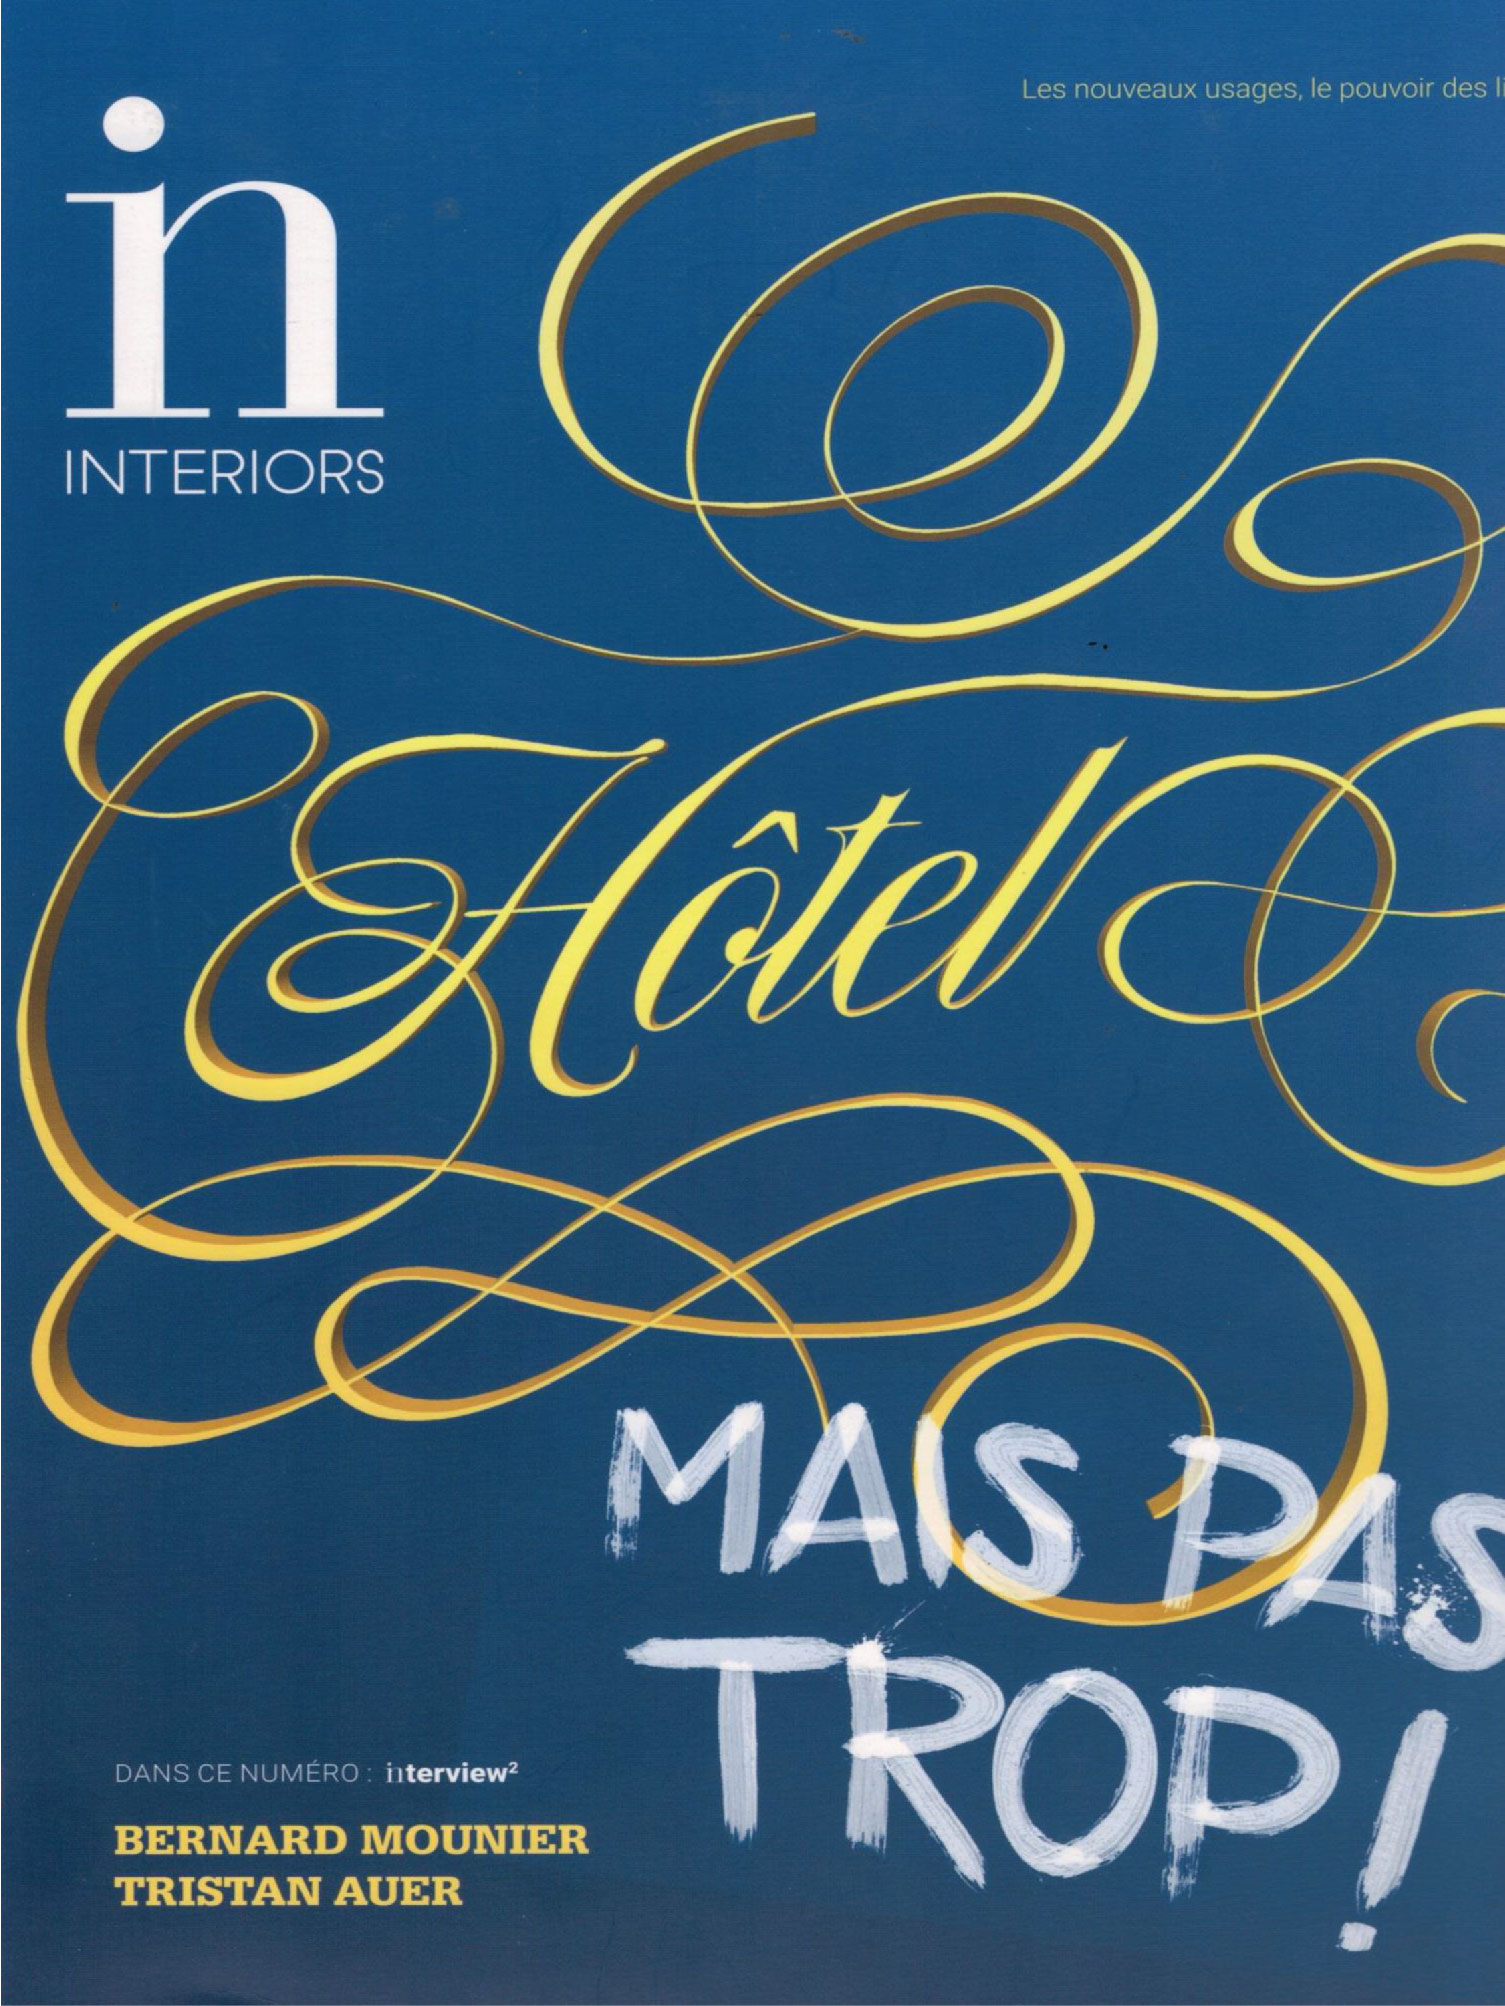 cover of the magazine in interiors january 2019